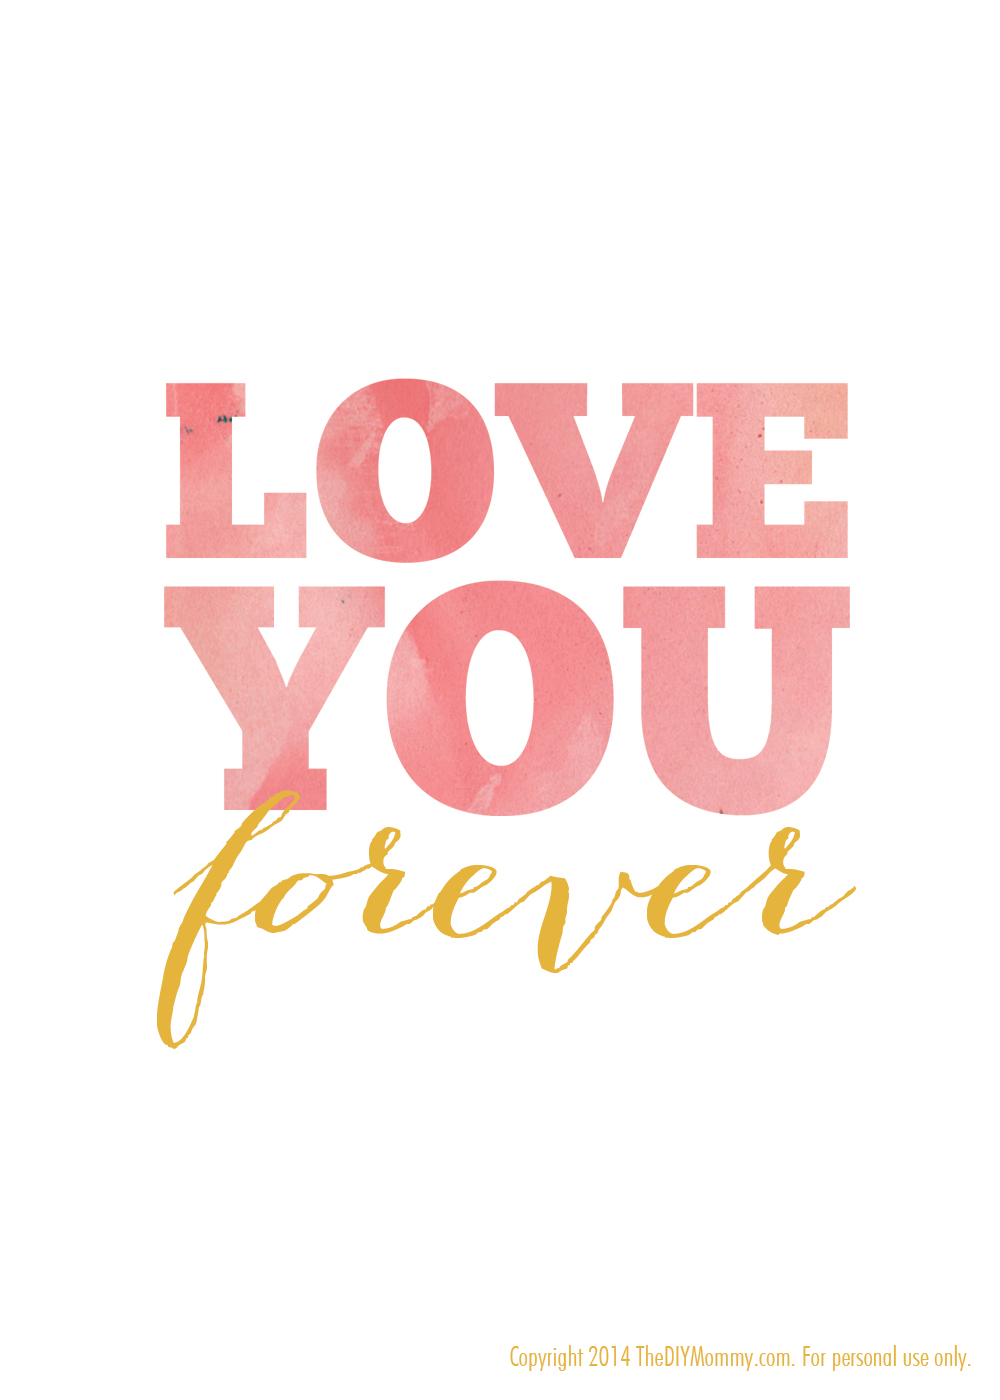 Love You Forever Free Nursery Printable Art by The DIY Mommy